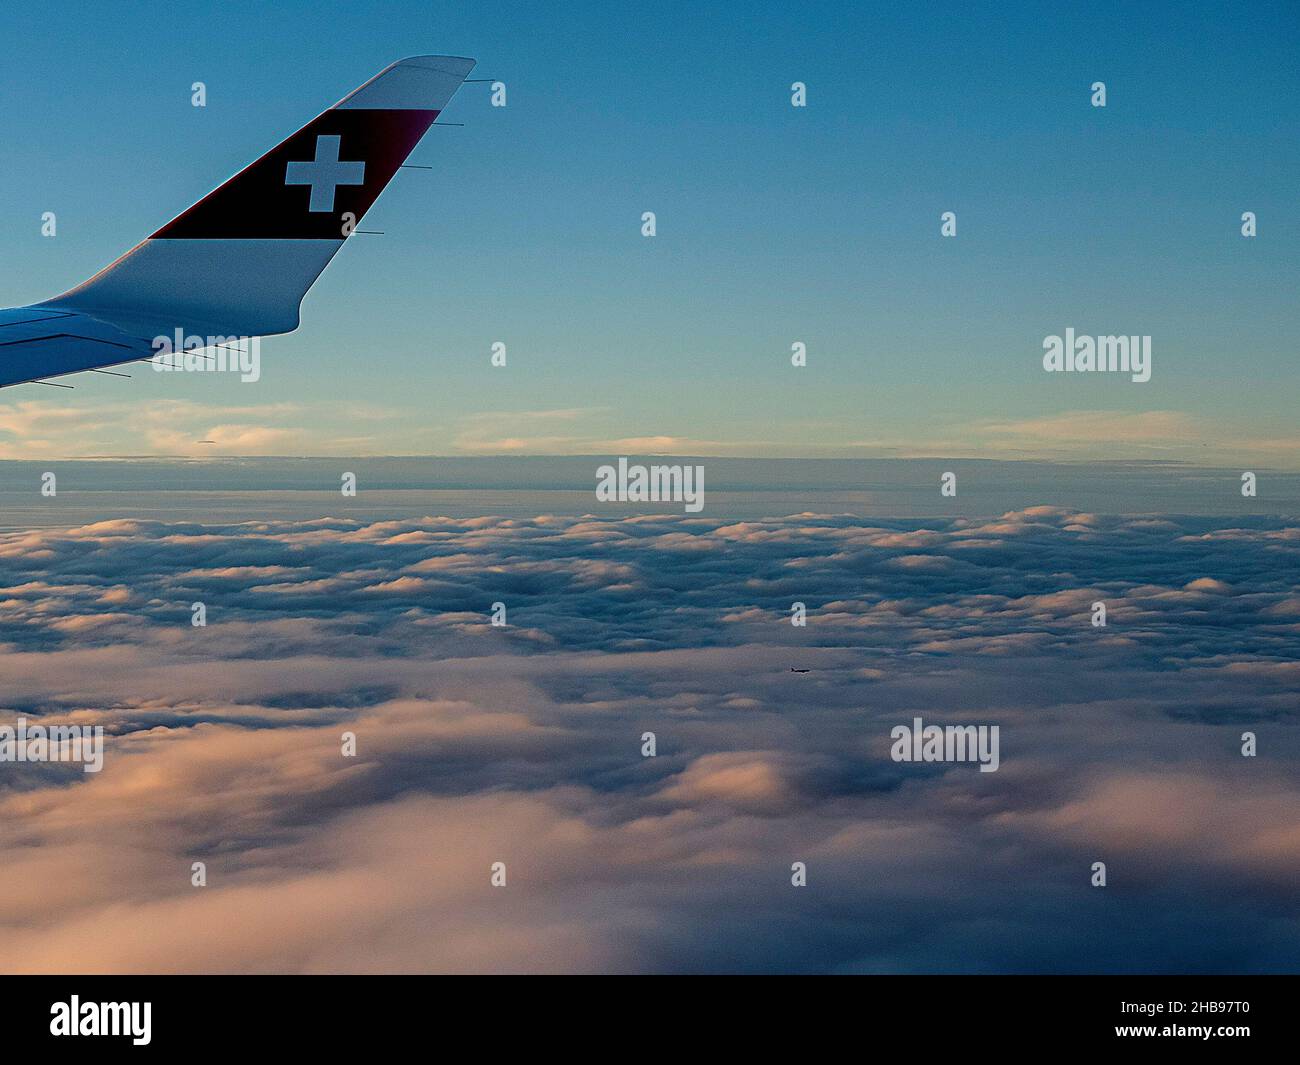 Flight view with Swiss airline logo on plane wing at sunset. Stock Photo